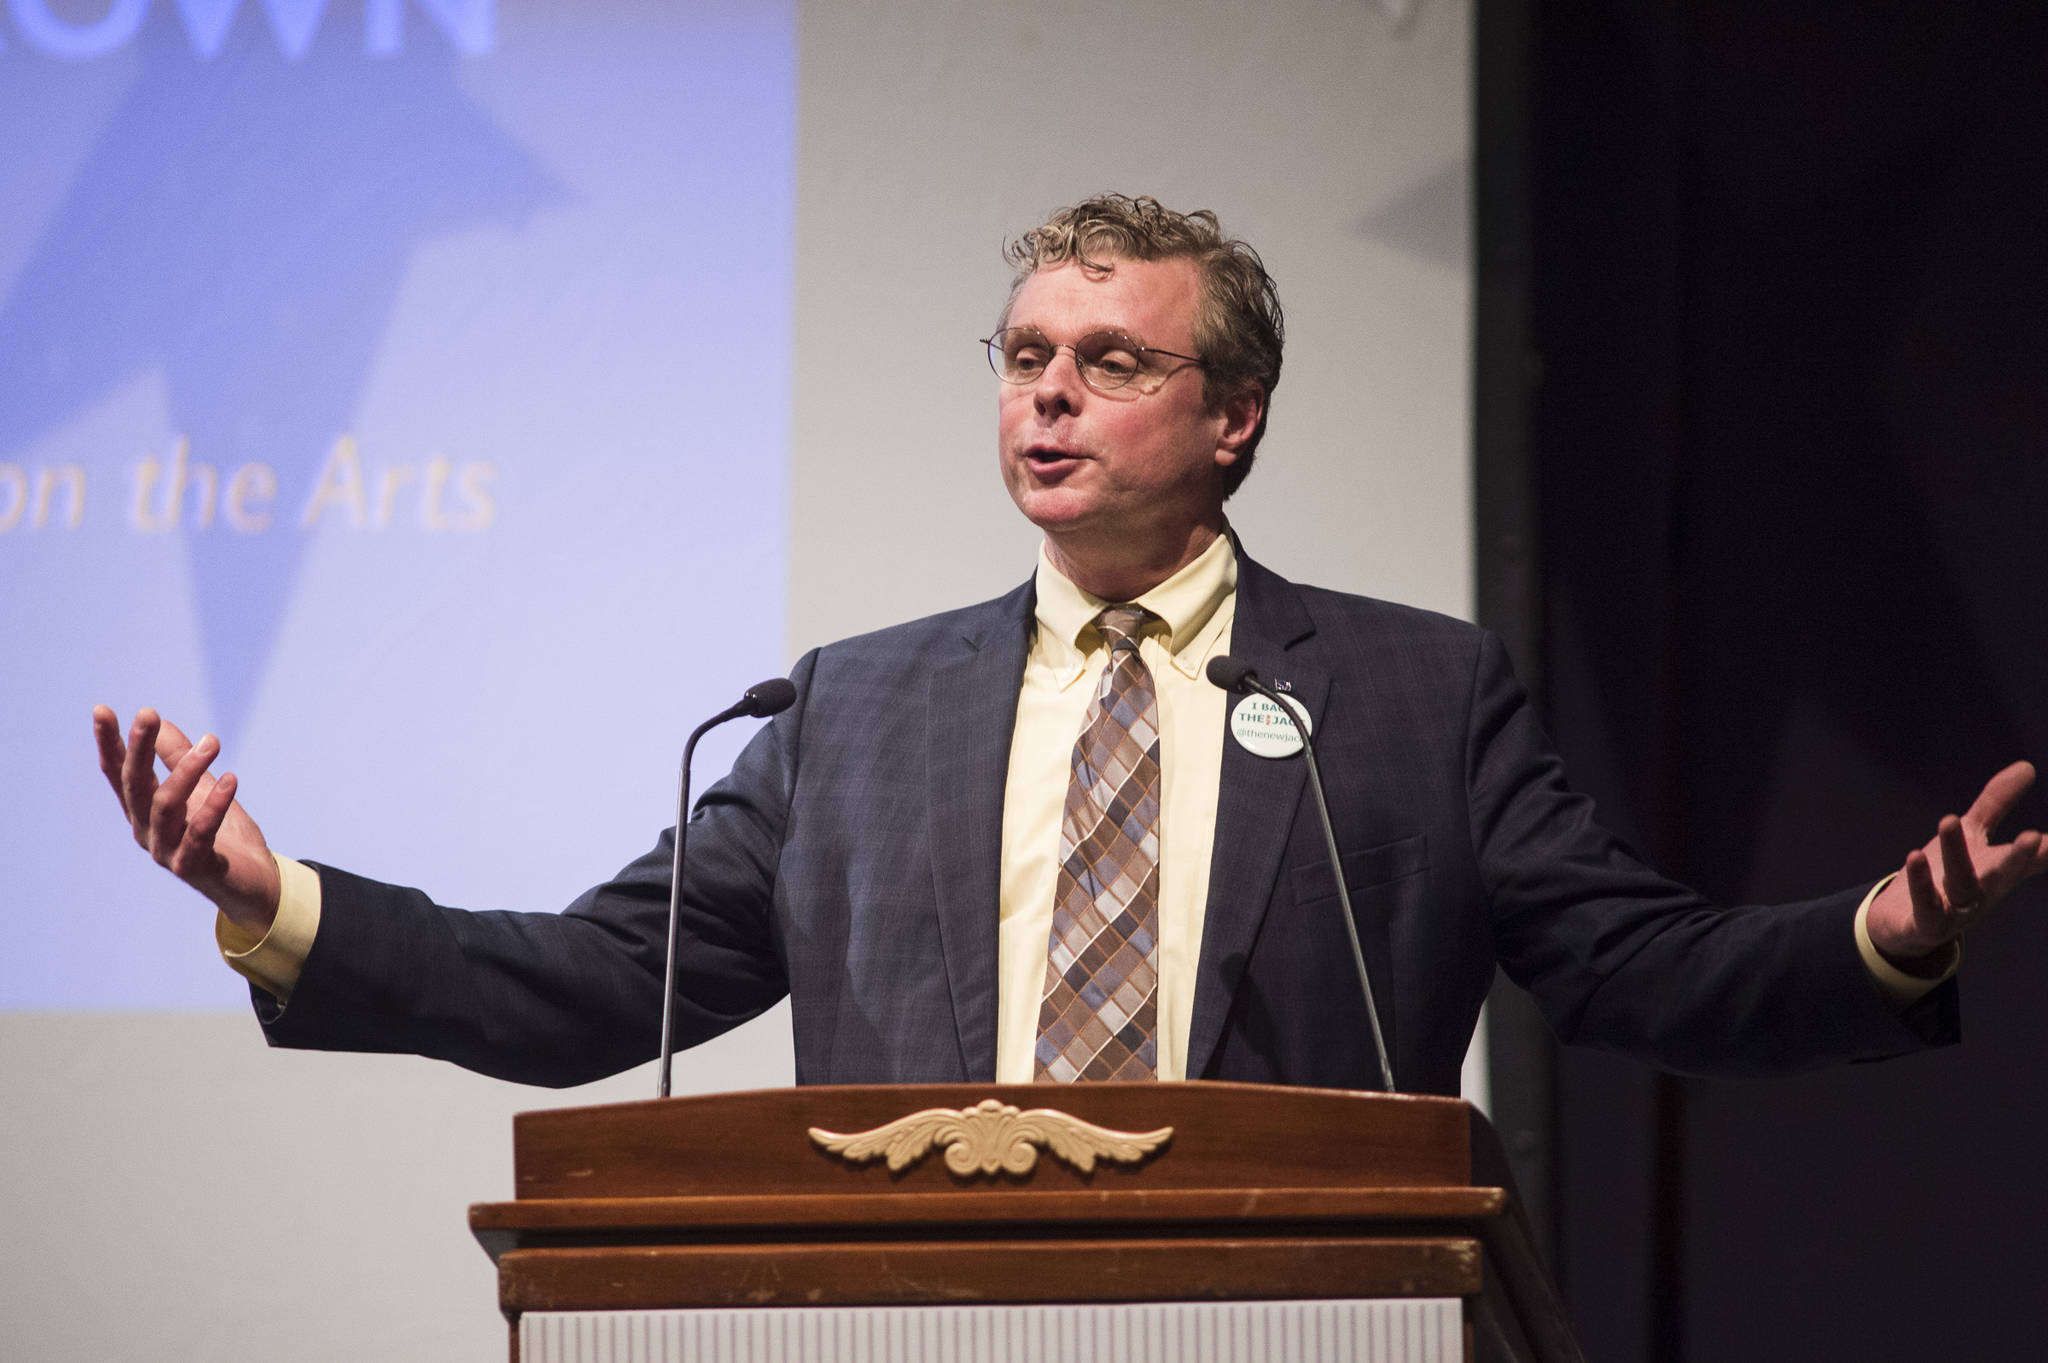 Benjamin Brown, Chair of the Alaska State Council on the Arts, gives welcoming remarks at the 2019 Governor’s Arts & Humanities Awards at the Juneau Arts & Culture Center on Thursday, Feb. 7, 2019. (Michael Penn | Juneau Empire)